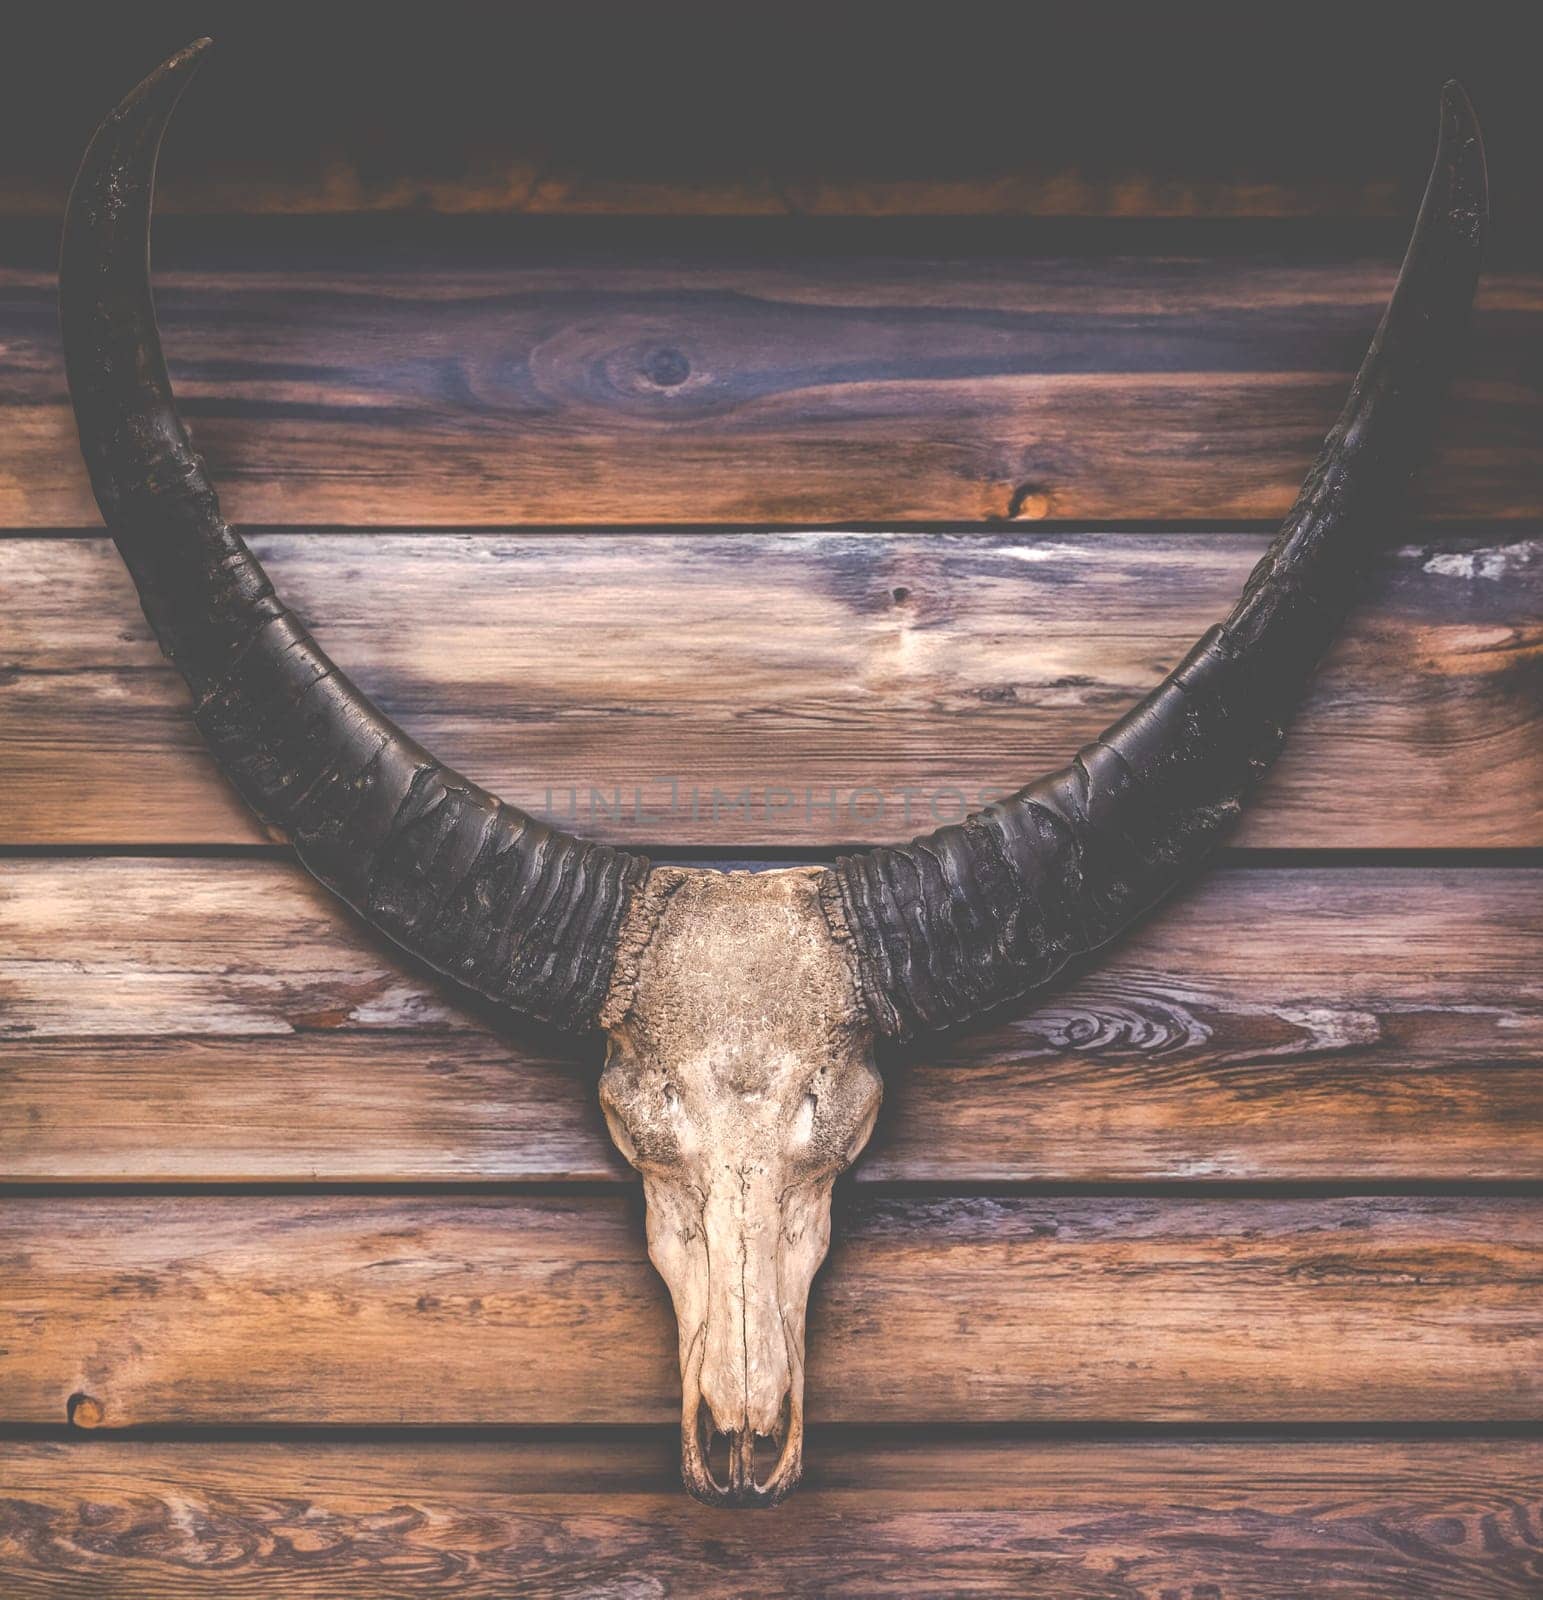 Skull And Horns Of A Cow On The Wall Of A Rustic Log Cabin